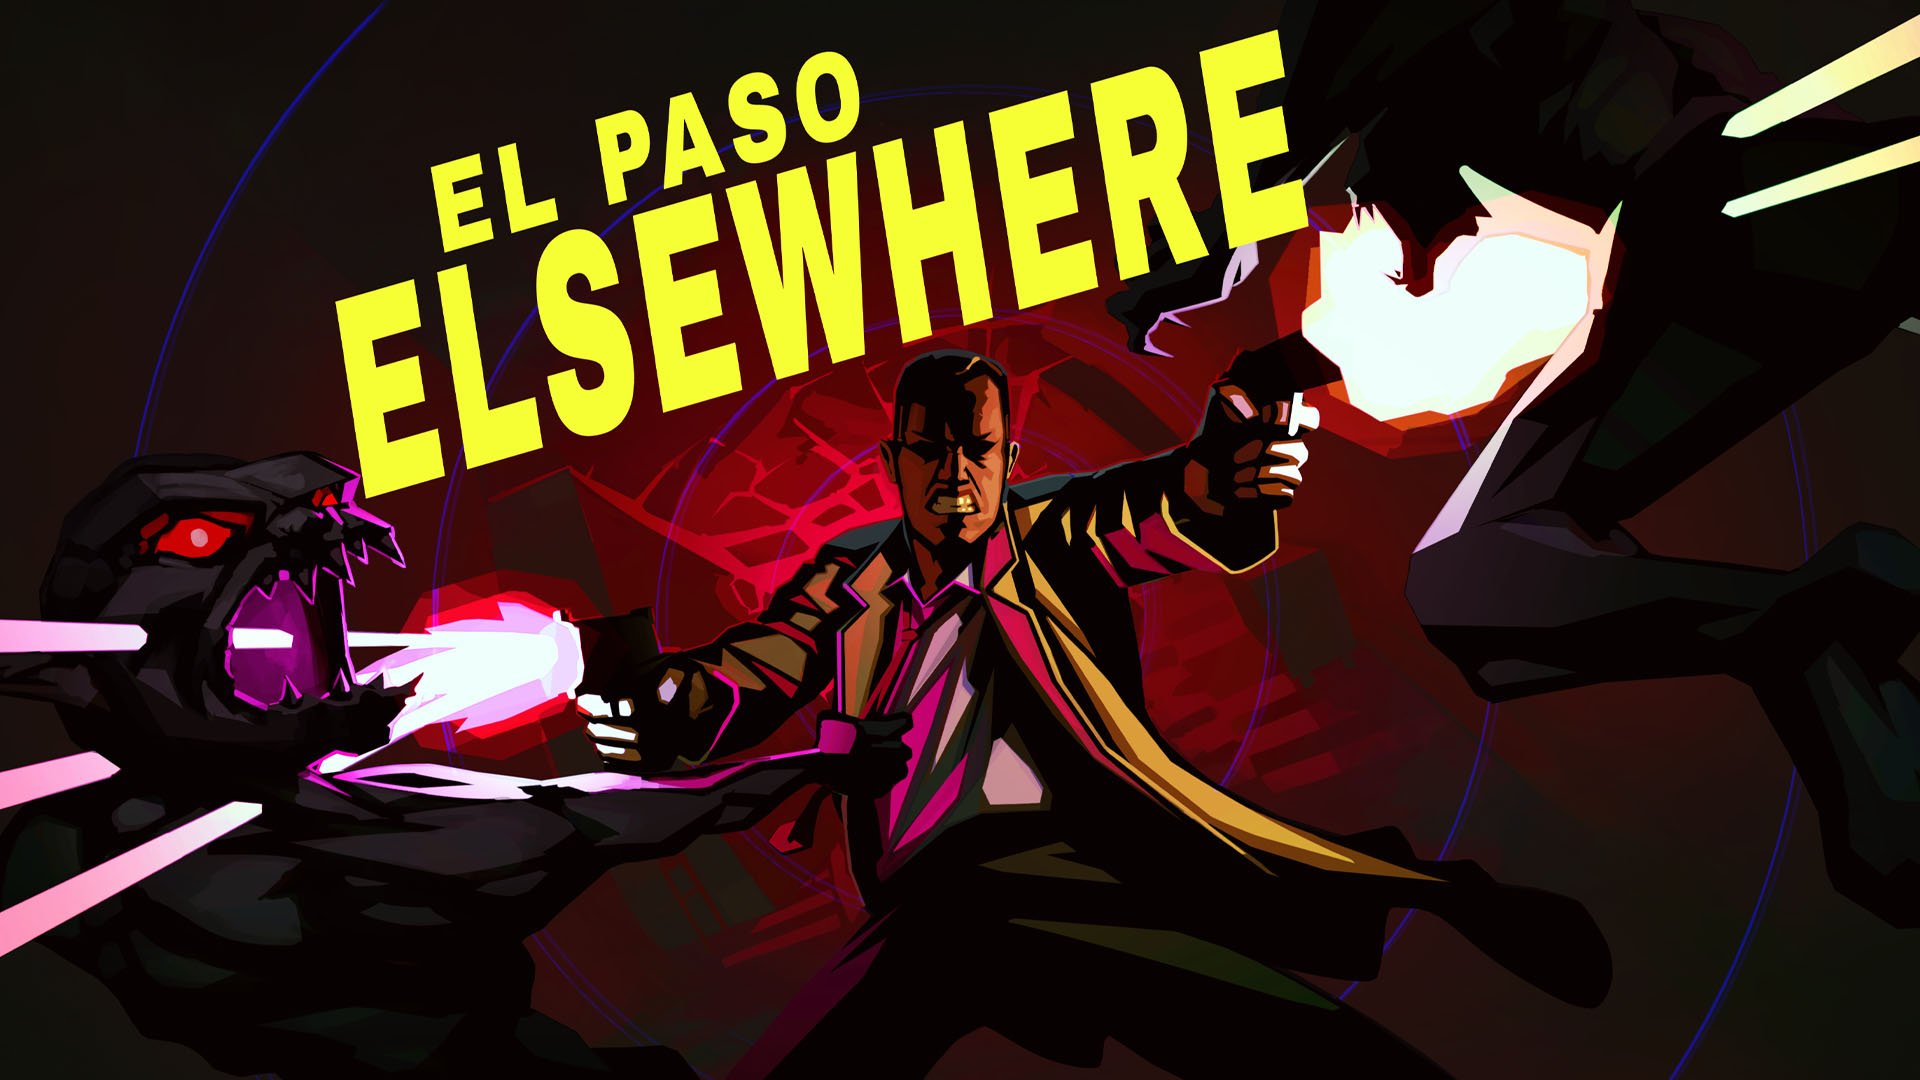 #
      Neo-noir third-person shooter El Paso, Elsewhere launches this fall for Xbox Series, Xbox One, and PC